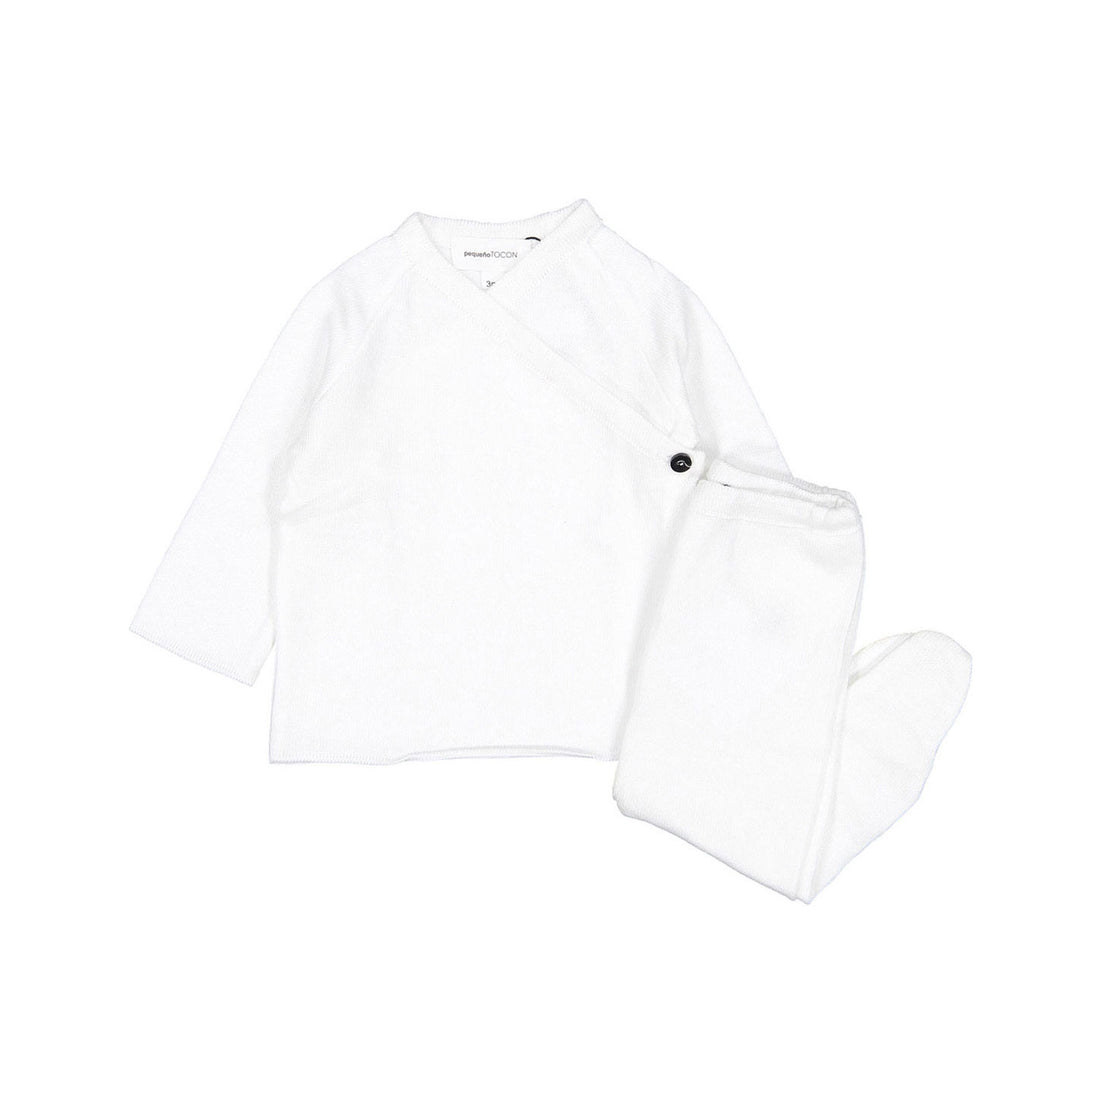 Pequeno TOCON White Baby Pants With Feet